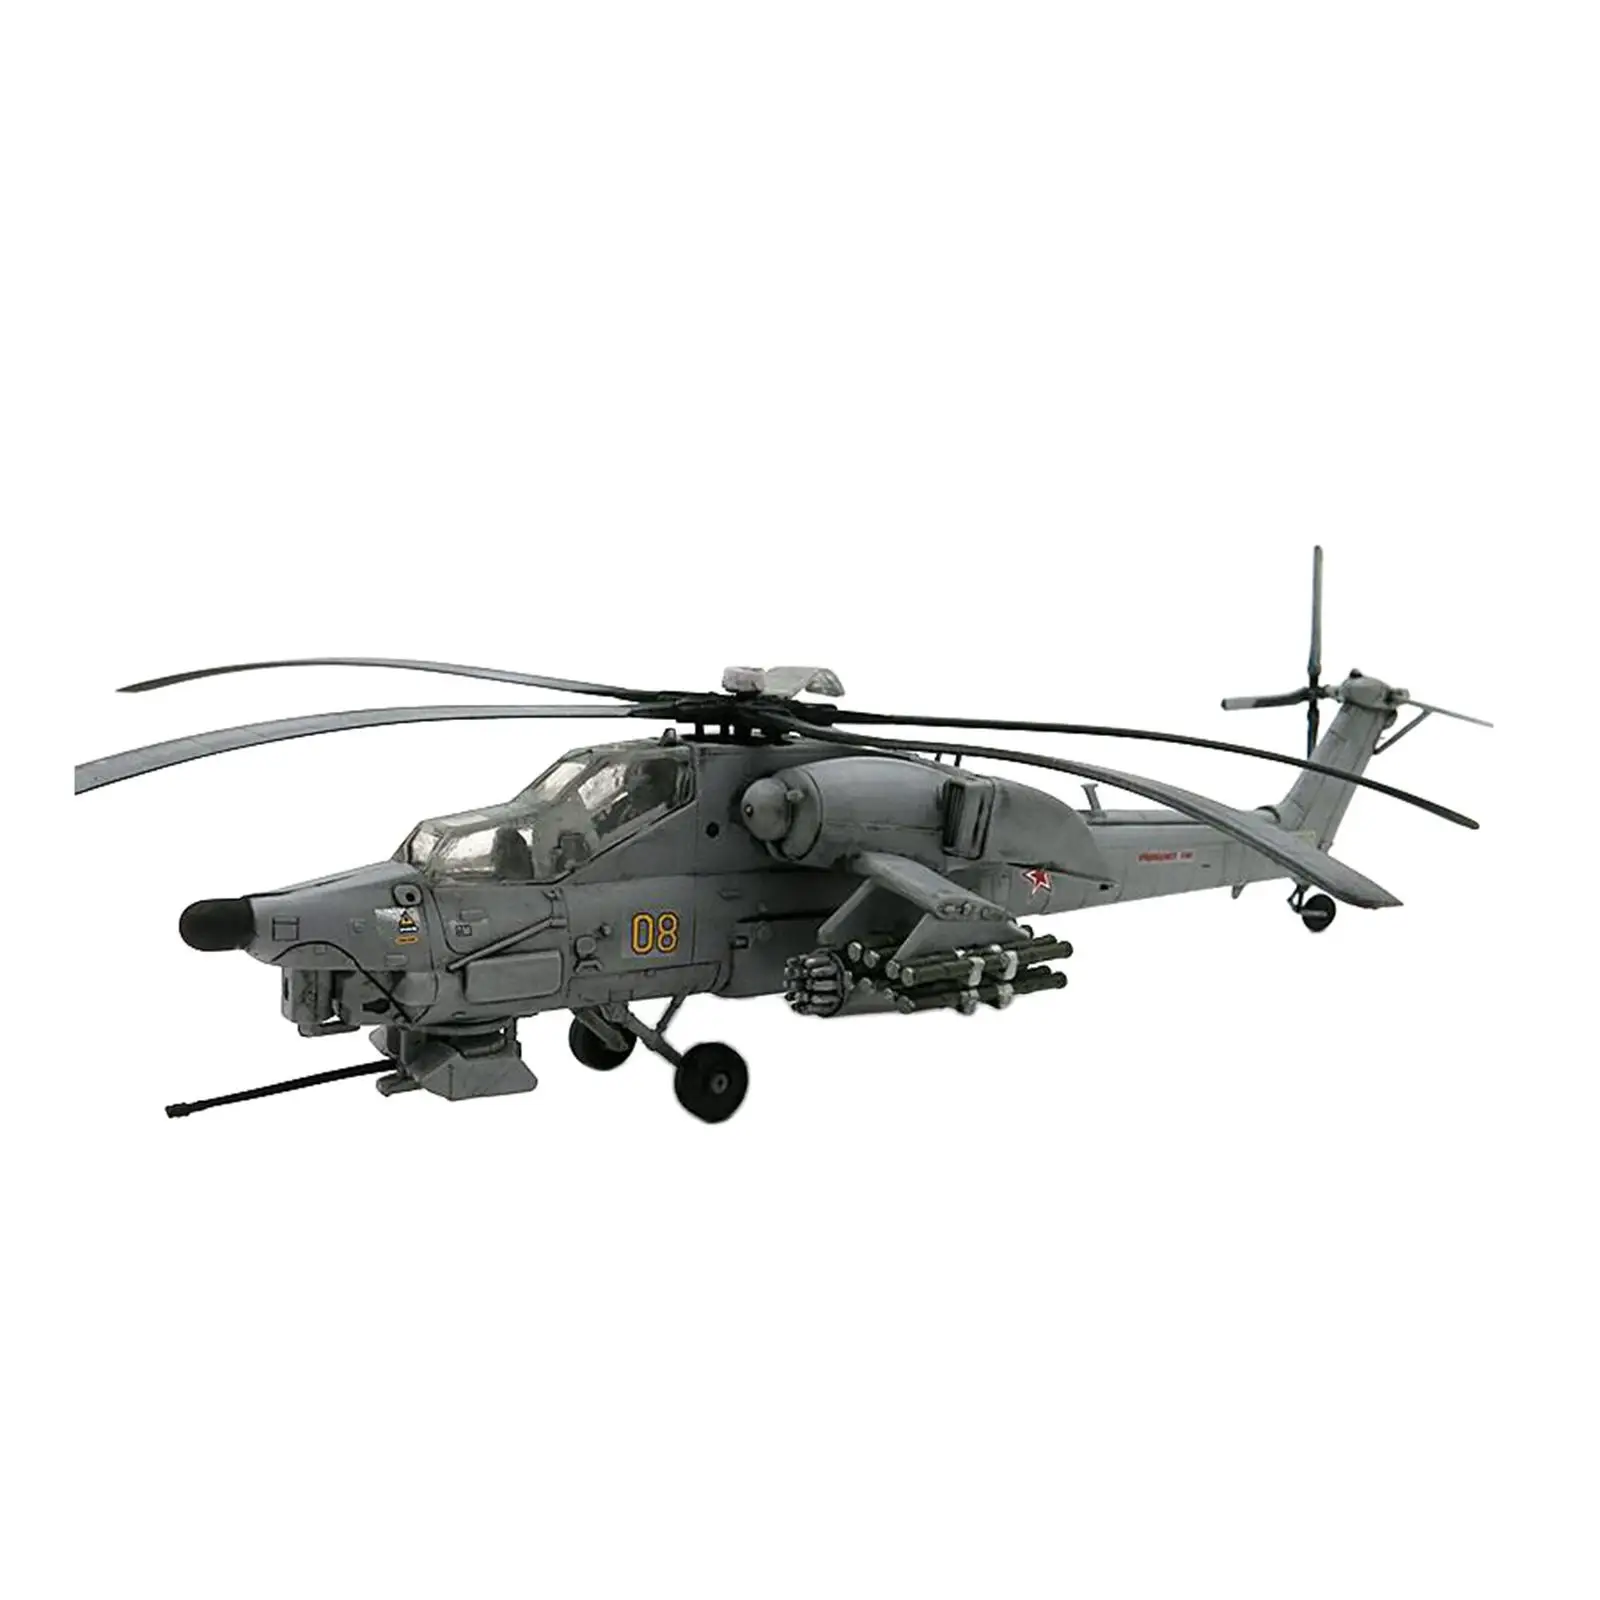 1/72 DIY Mi 28 Havoc Anti Tank Helicopter Model Durable Aviation Collectibles Versatile Realistic Plastic Toy Airplane Model